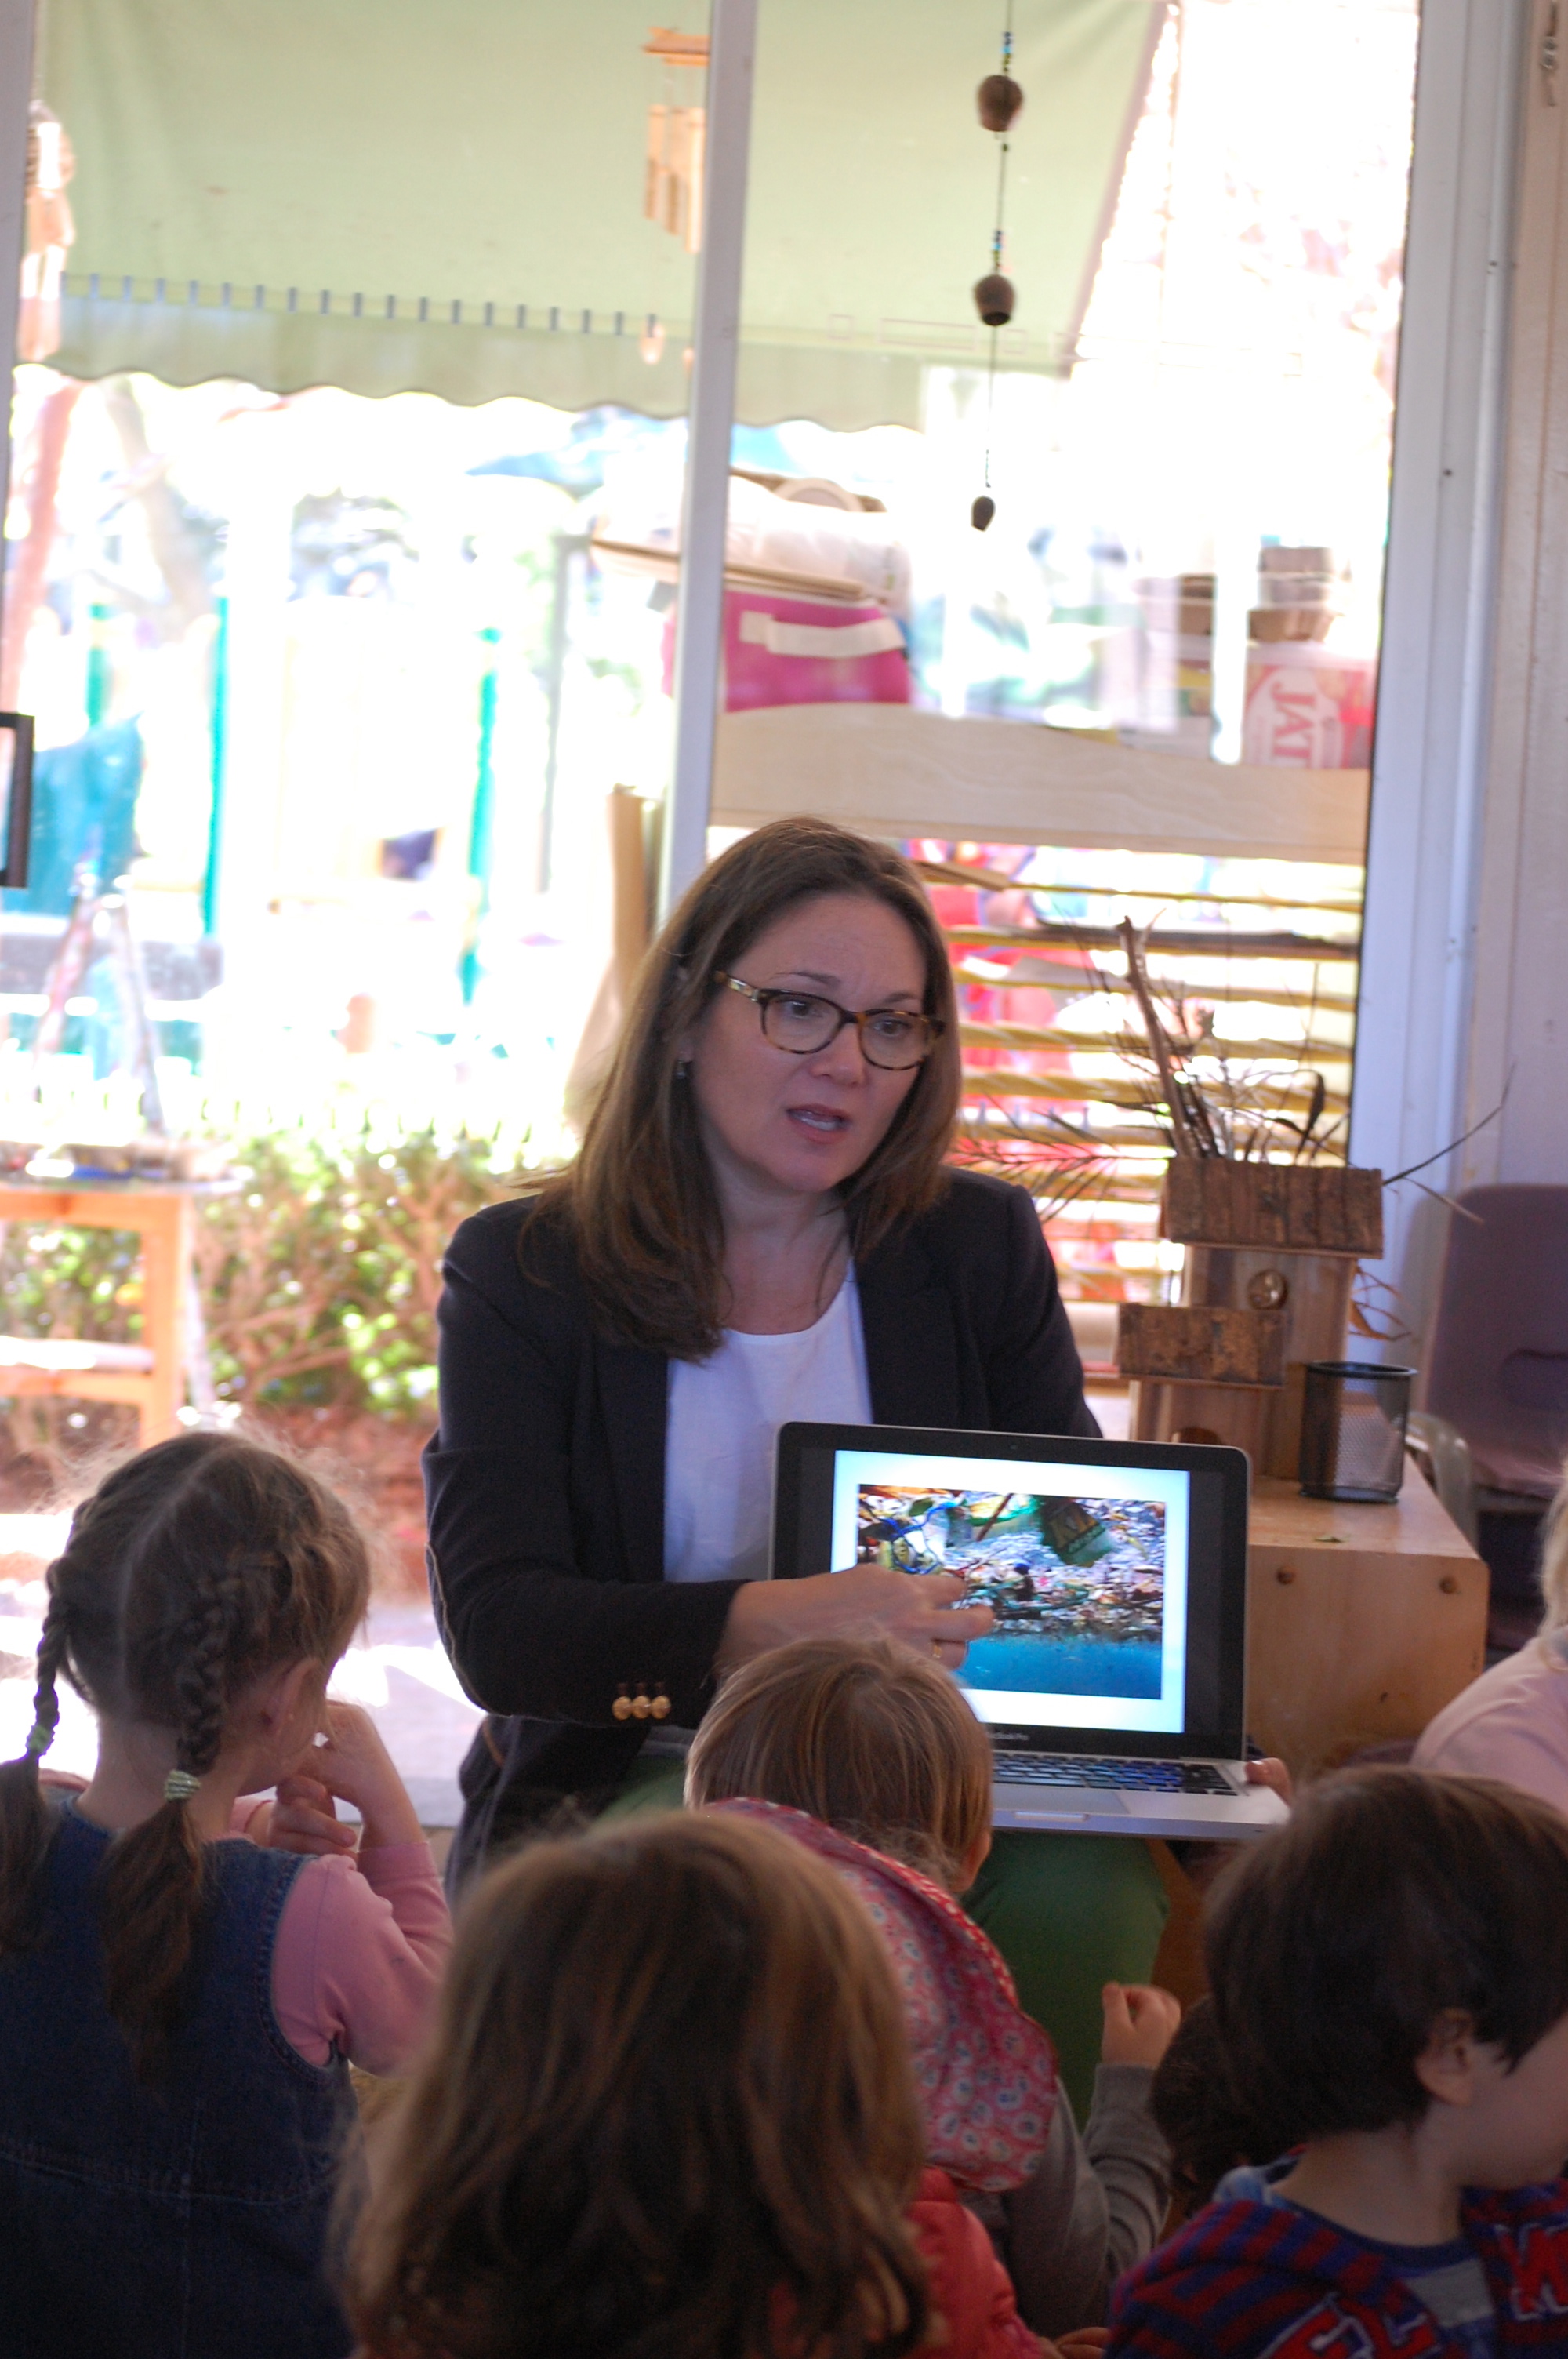 Discussing ocean pollution with a group of Pre-K students